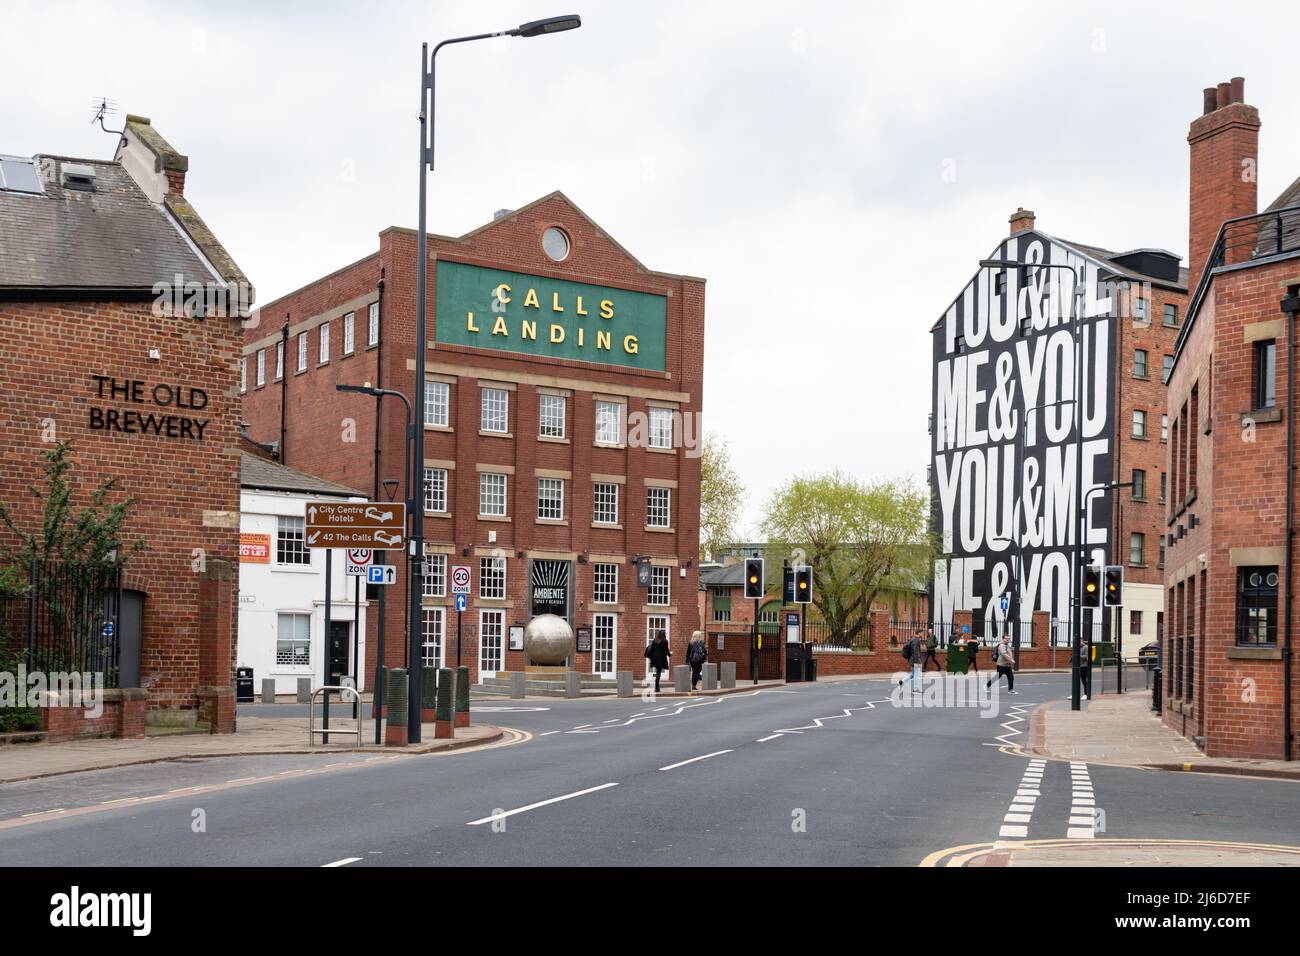 The Calls, Leeds - The Old Brewery, Calls Landing and You and Me, Me & You mural by Anthony Burrill and In Good Company, The Calls, Leeds, England, UK Stock Photo